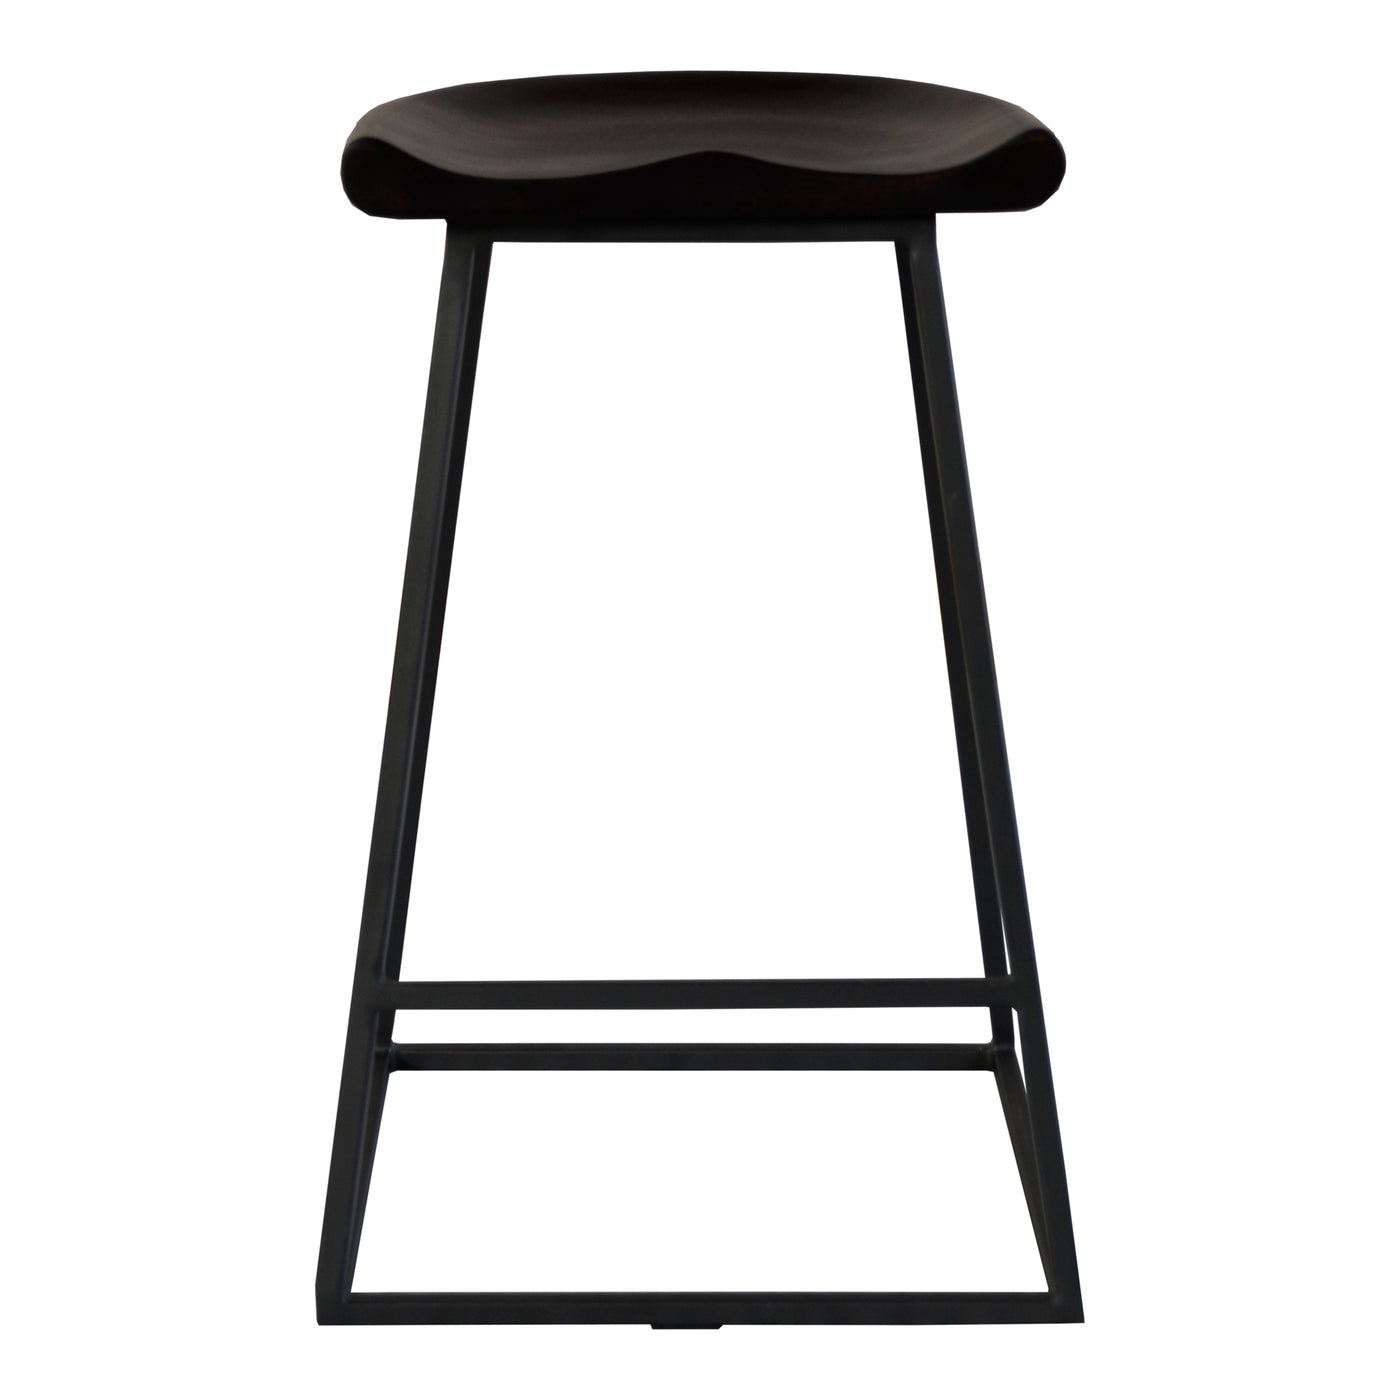 Modern design meets industrial influence. With a solid acacia wood seat and steel base, the Jackman Bar Stool adds an airy...